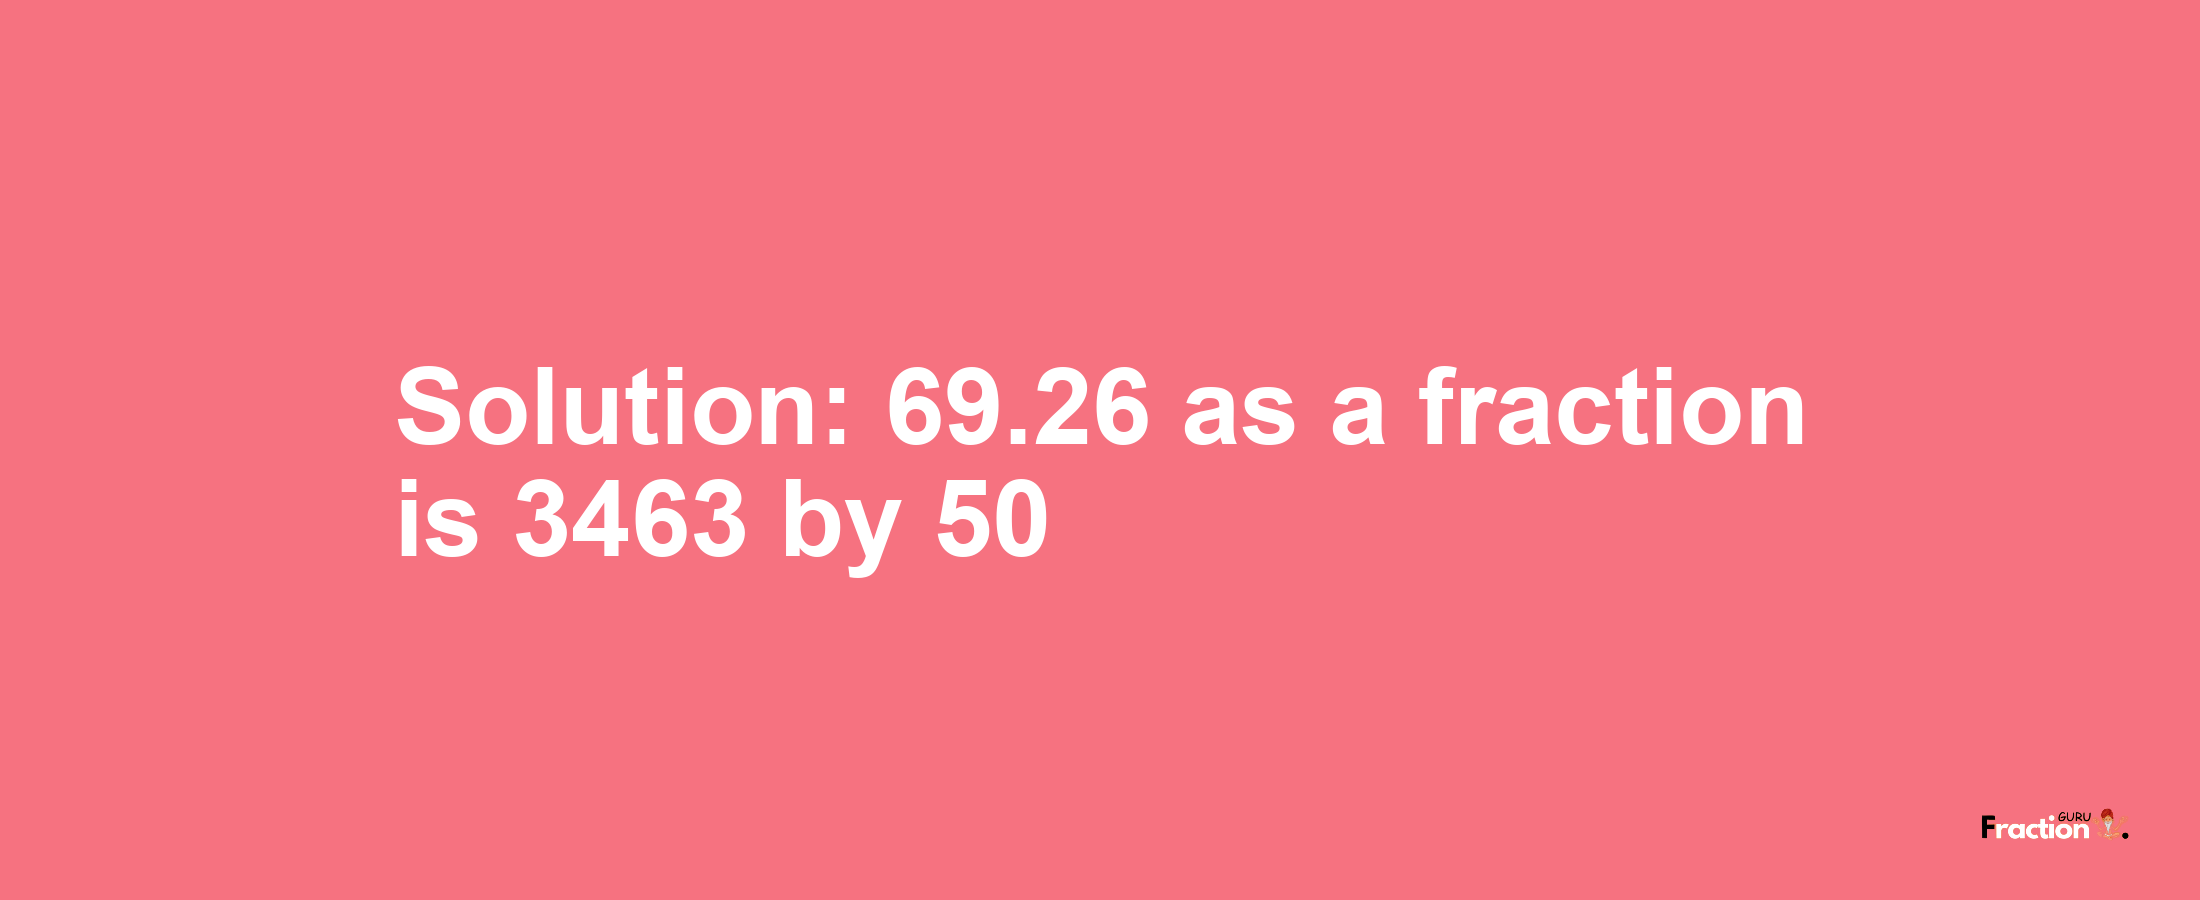 Solution:69.26 as a fraction is 3463/50